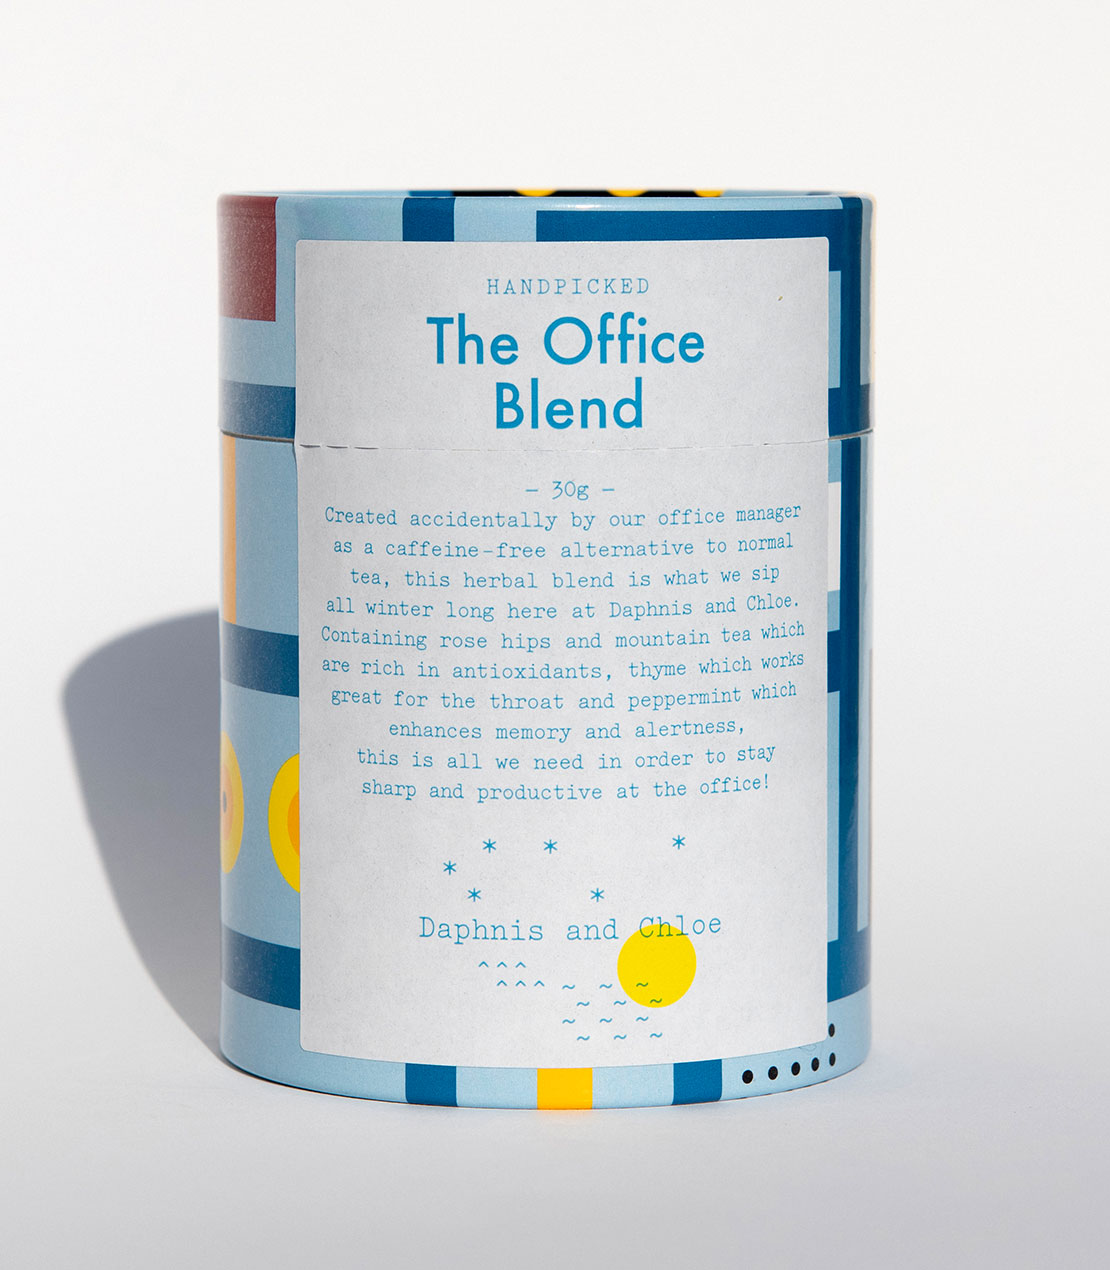 The Office Blend